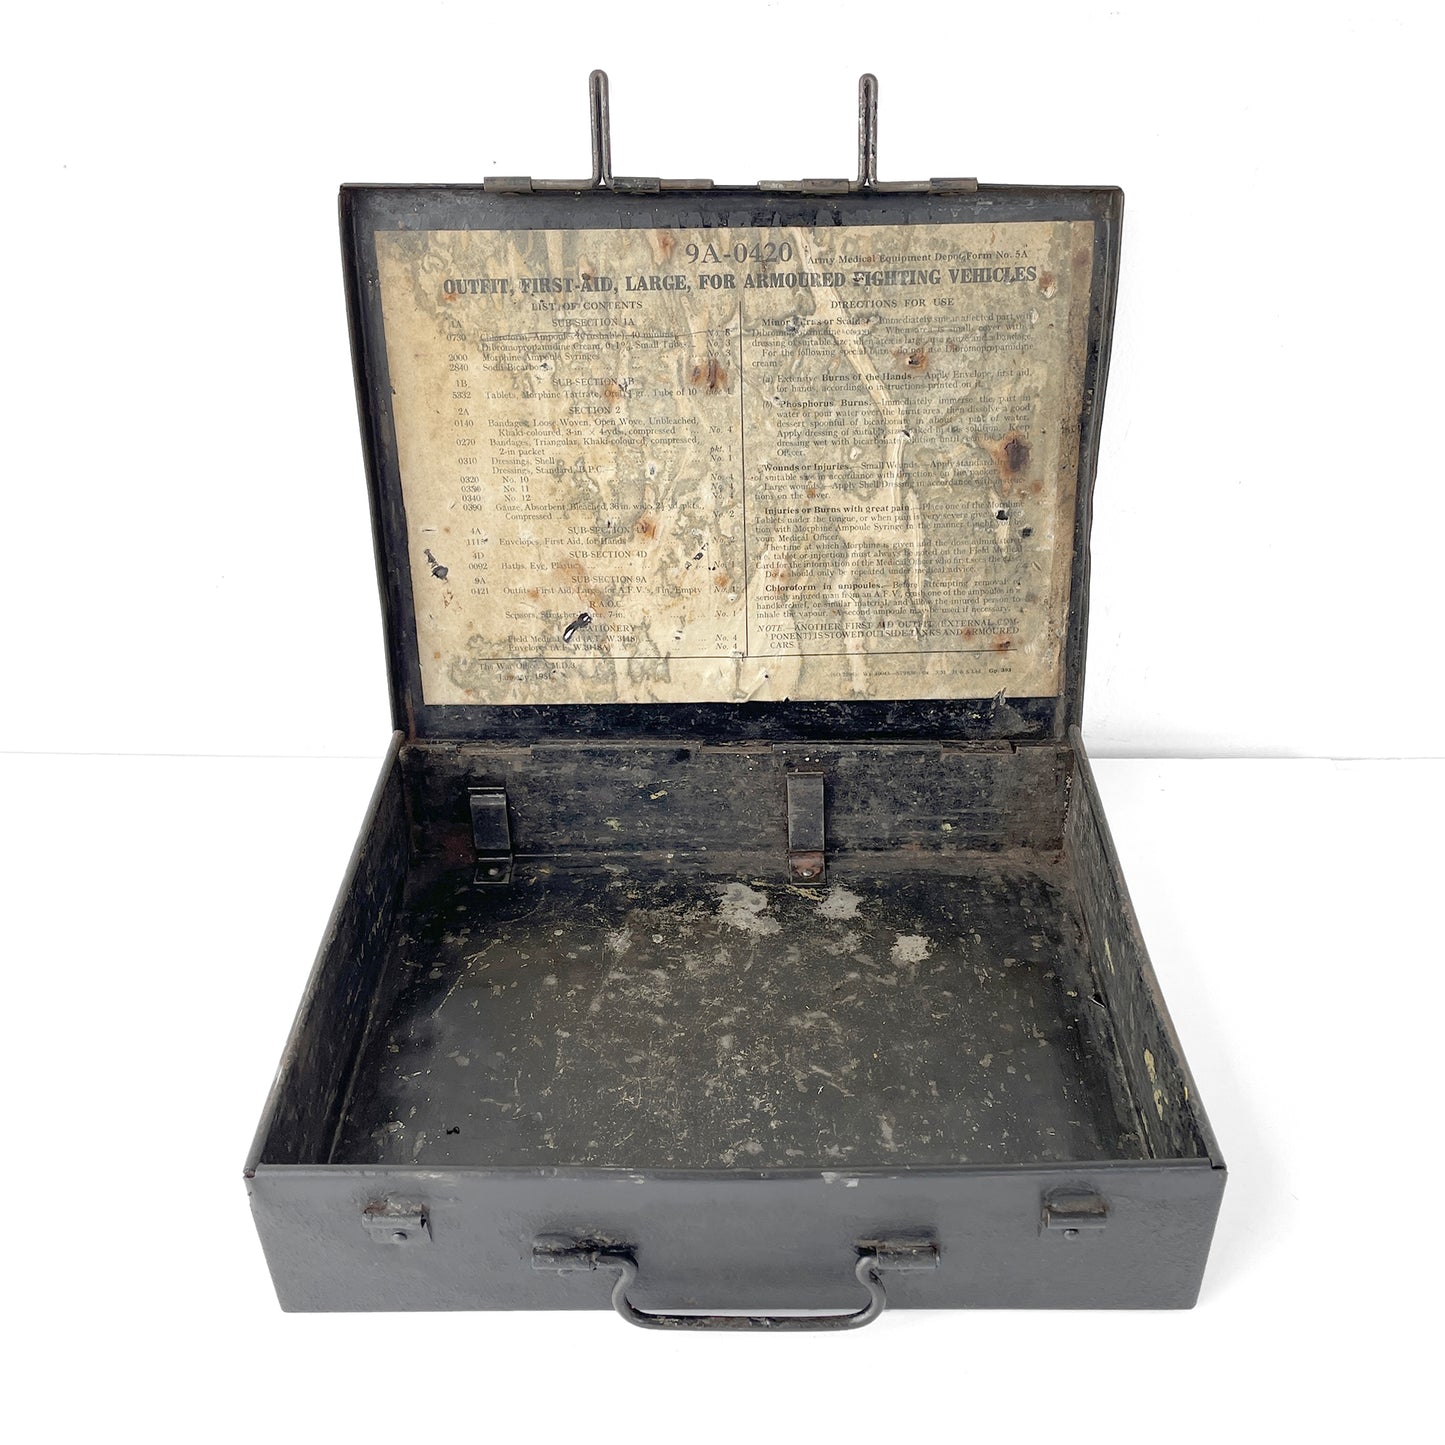 1951 First-Aid Box for ‘Armoured Fighting Vehicles’